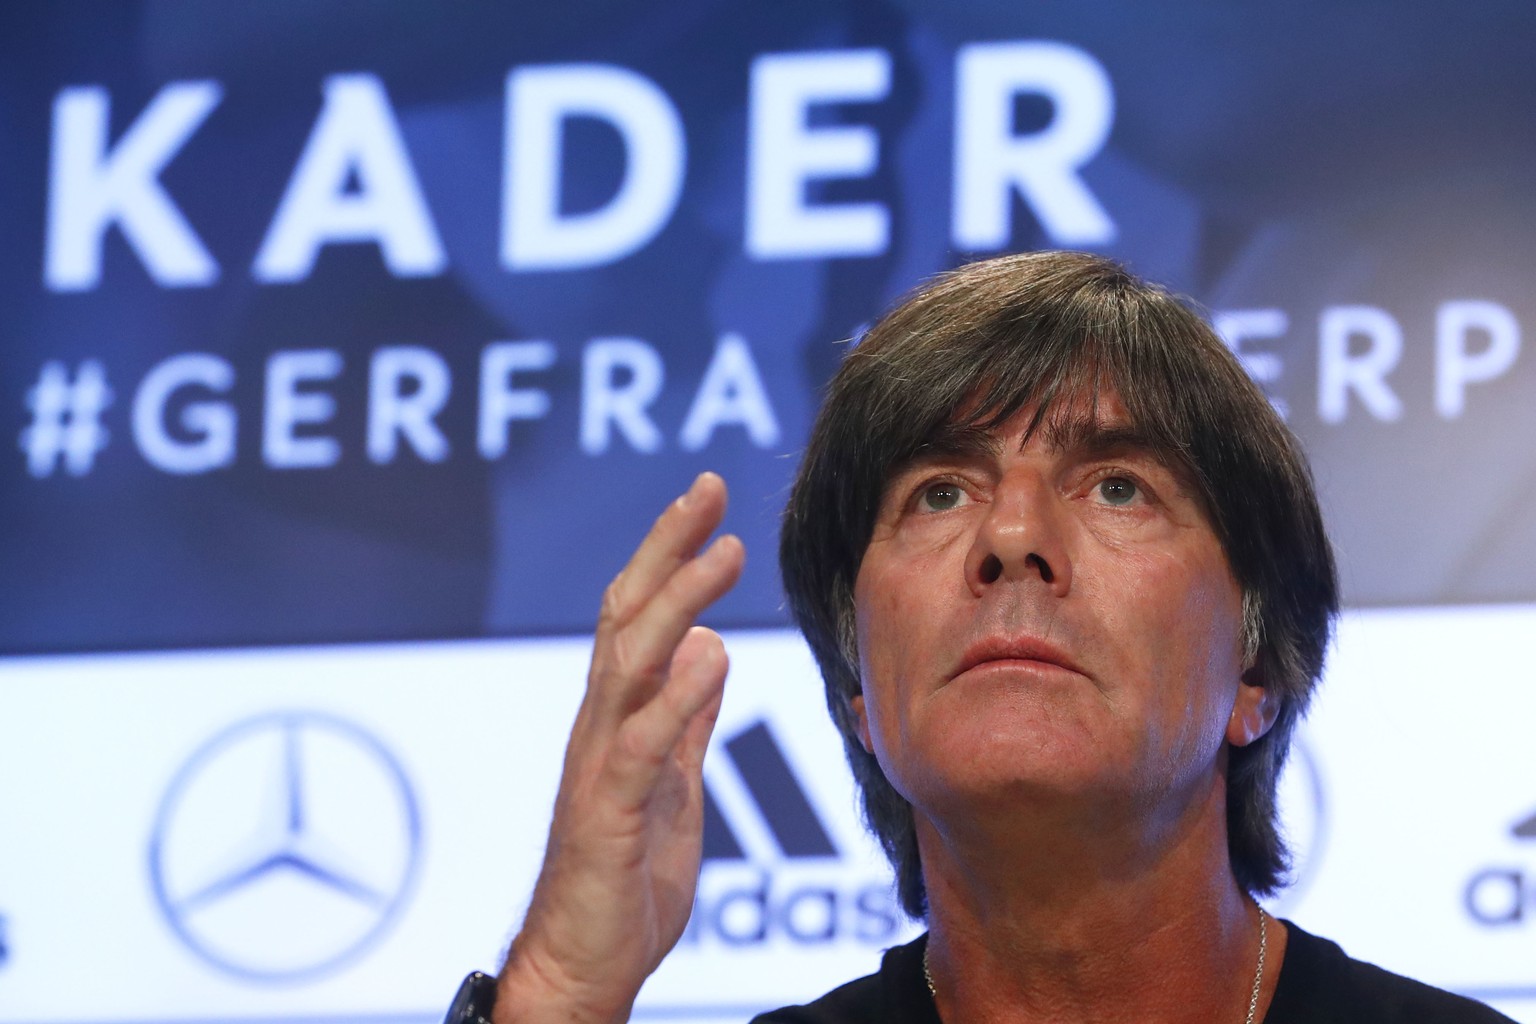 Joachim Loew, coach of the German national soccer team, gestures during his first news conference after the World Cup in Munich, Germany, Wednesday, Aug. 29, 2018. (AP Photo/Matthias Schrader)